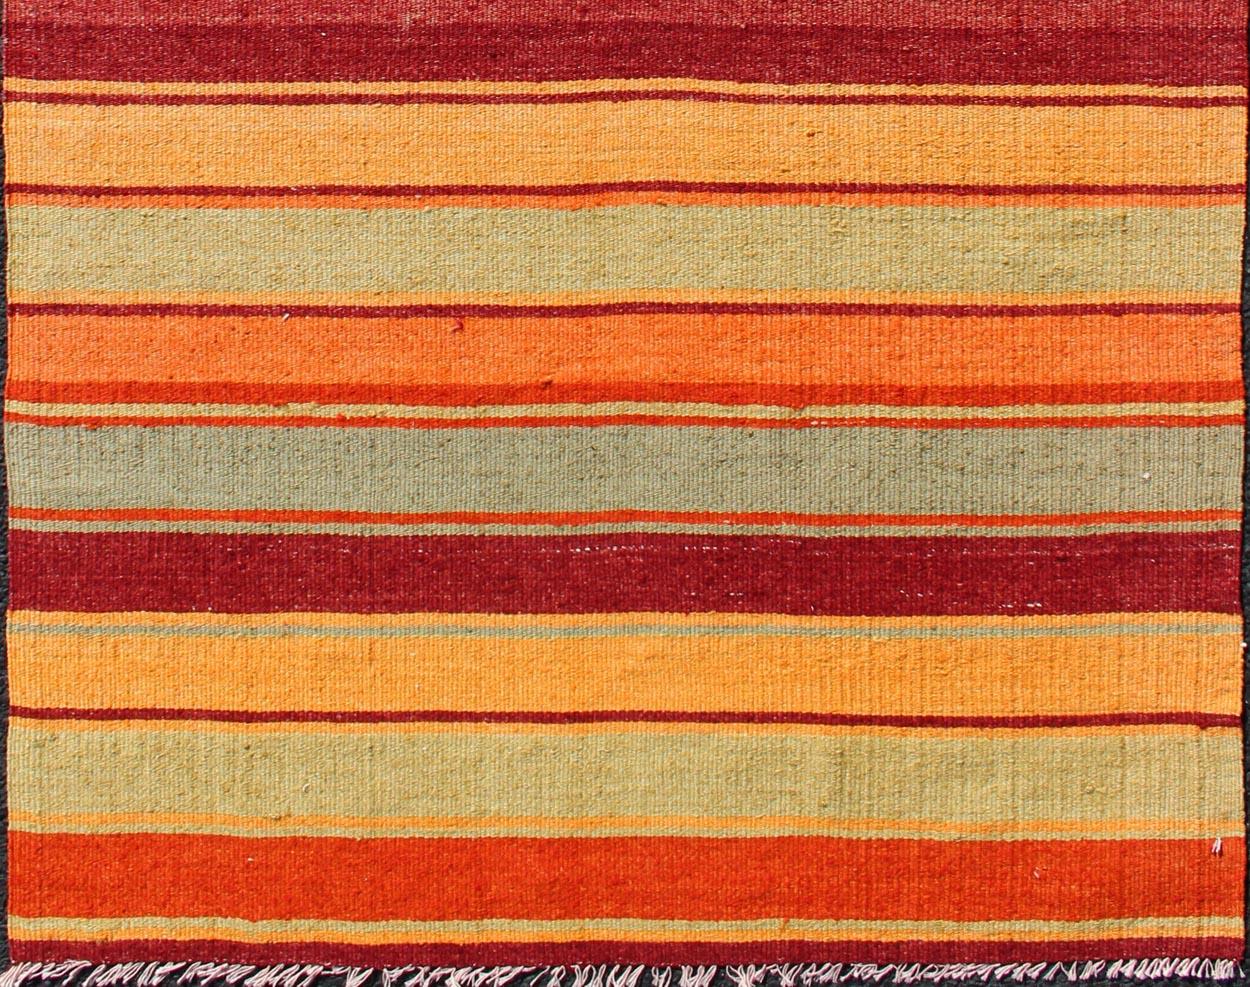 Hand-Woven Bright & Colorful Vintage Turkish Kilim in Red, Green, Yellow, and Orange For Sale